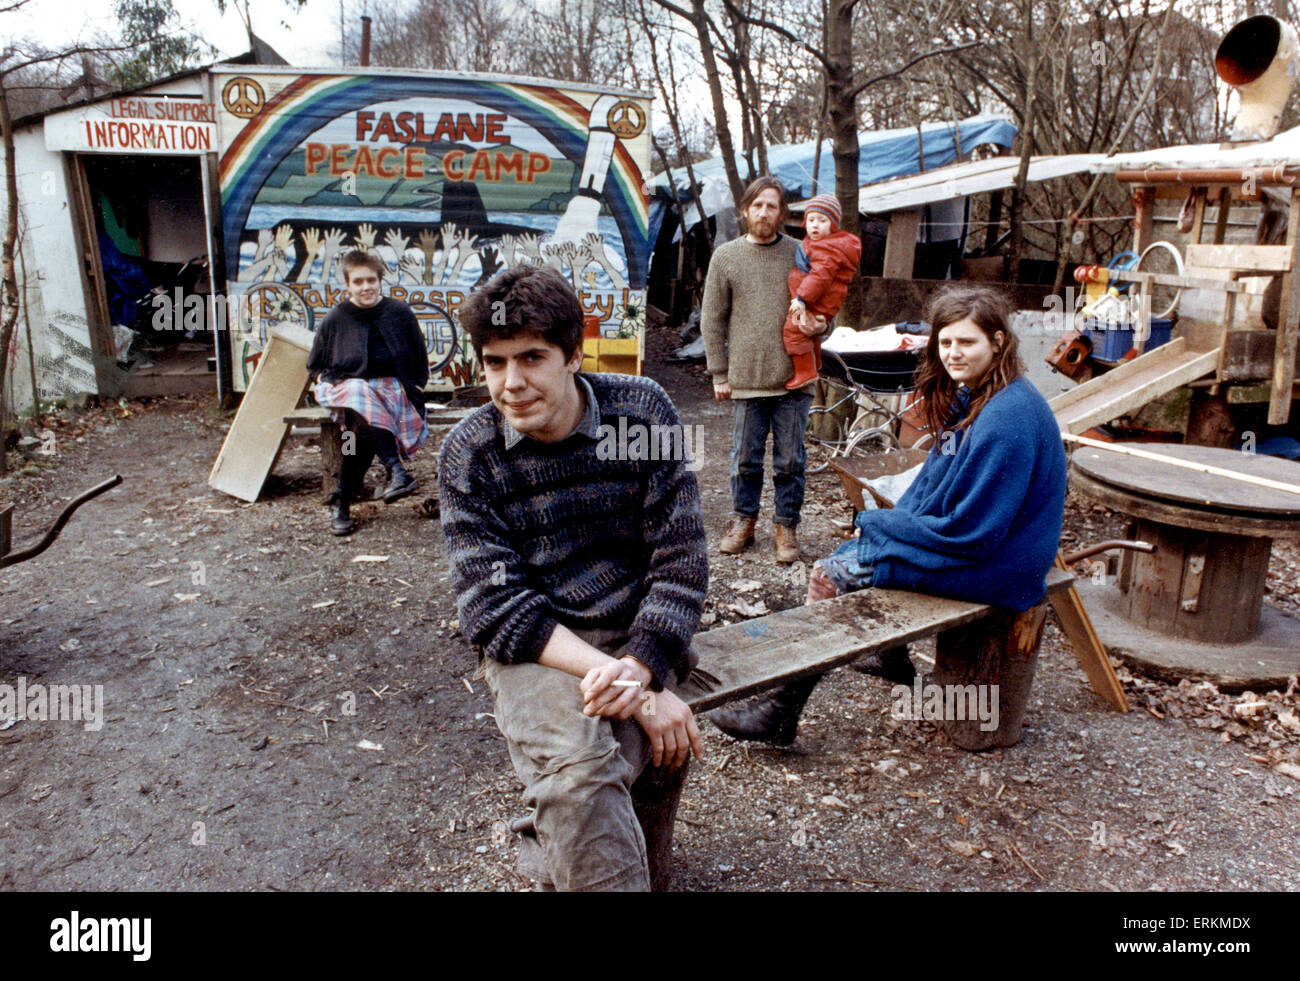 Peace Camp protesters at Faslane, Pamela Backs, Phil Jones and Jim Chestnut with son Ben. 7th February 1991. Stock Photo